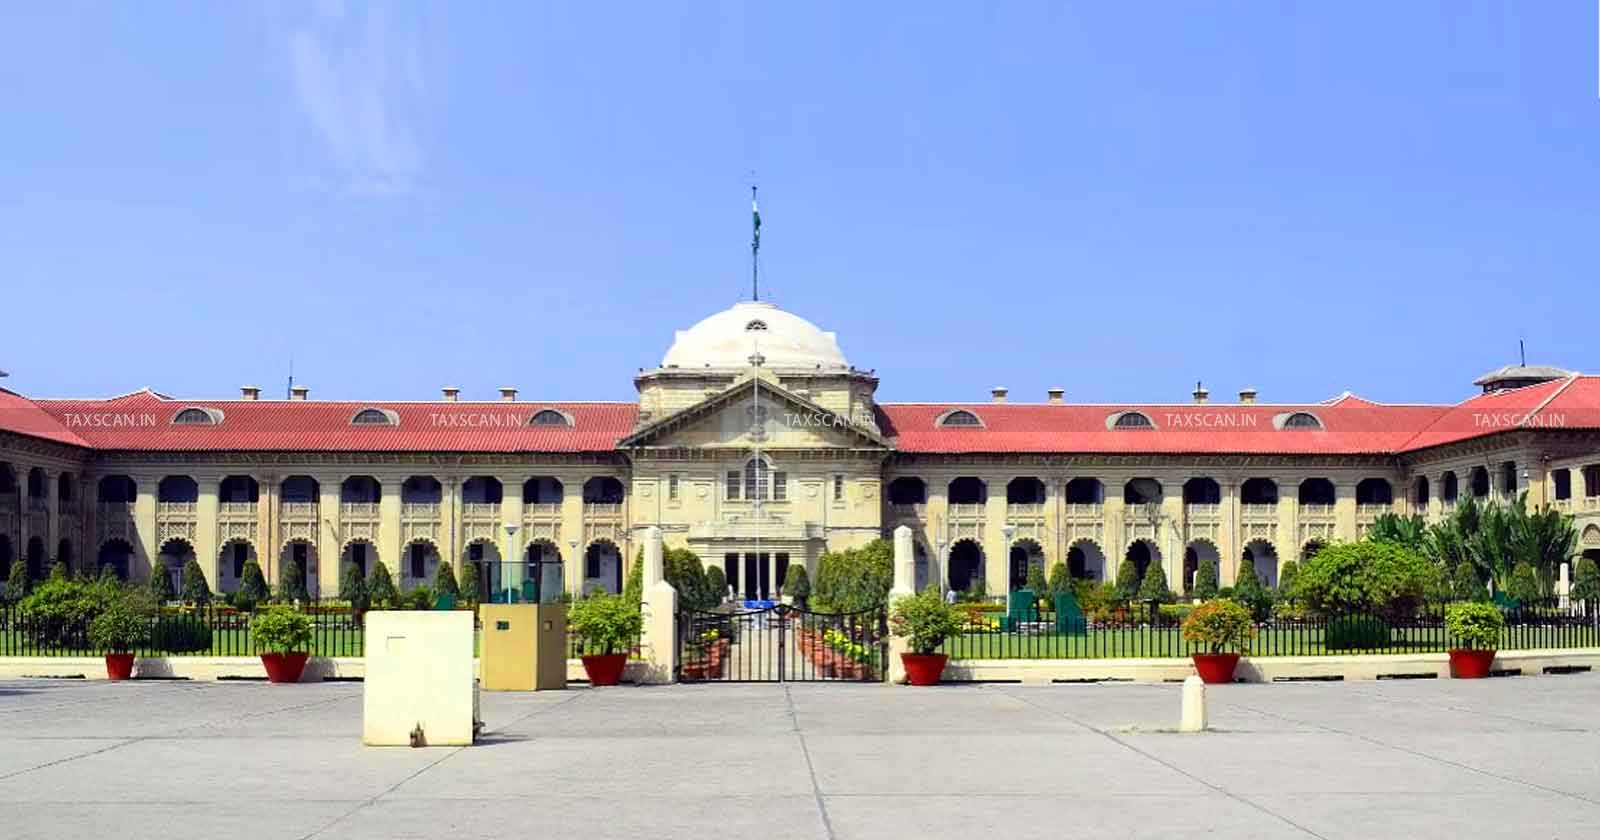 Allahabad HC directs GST Department - Assessee to Upload Form ITC - 01 to claim ITC - TAXSCANAllahabad HC directs GST Department - Assessee to Upload Form ITC - 01 to claim ITC - TAXSCAN